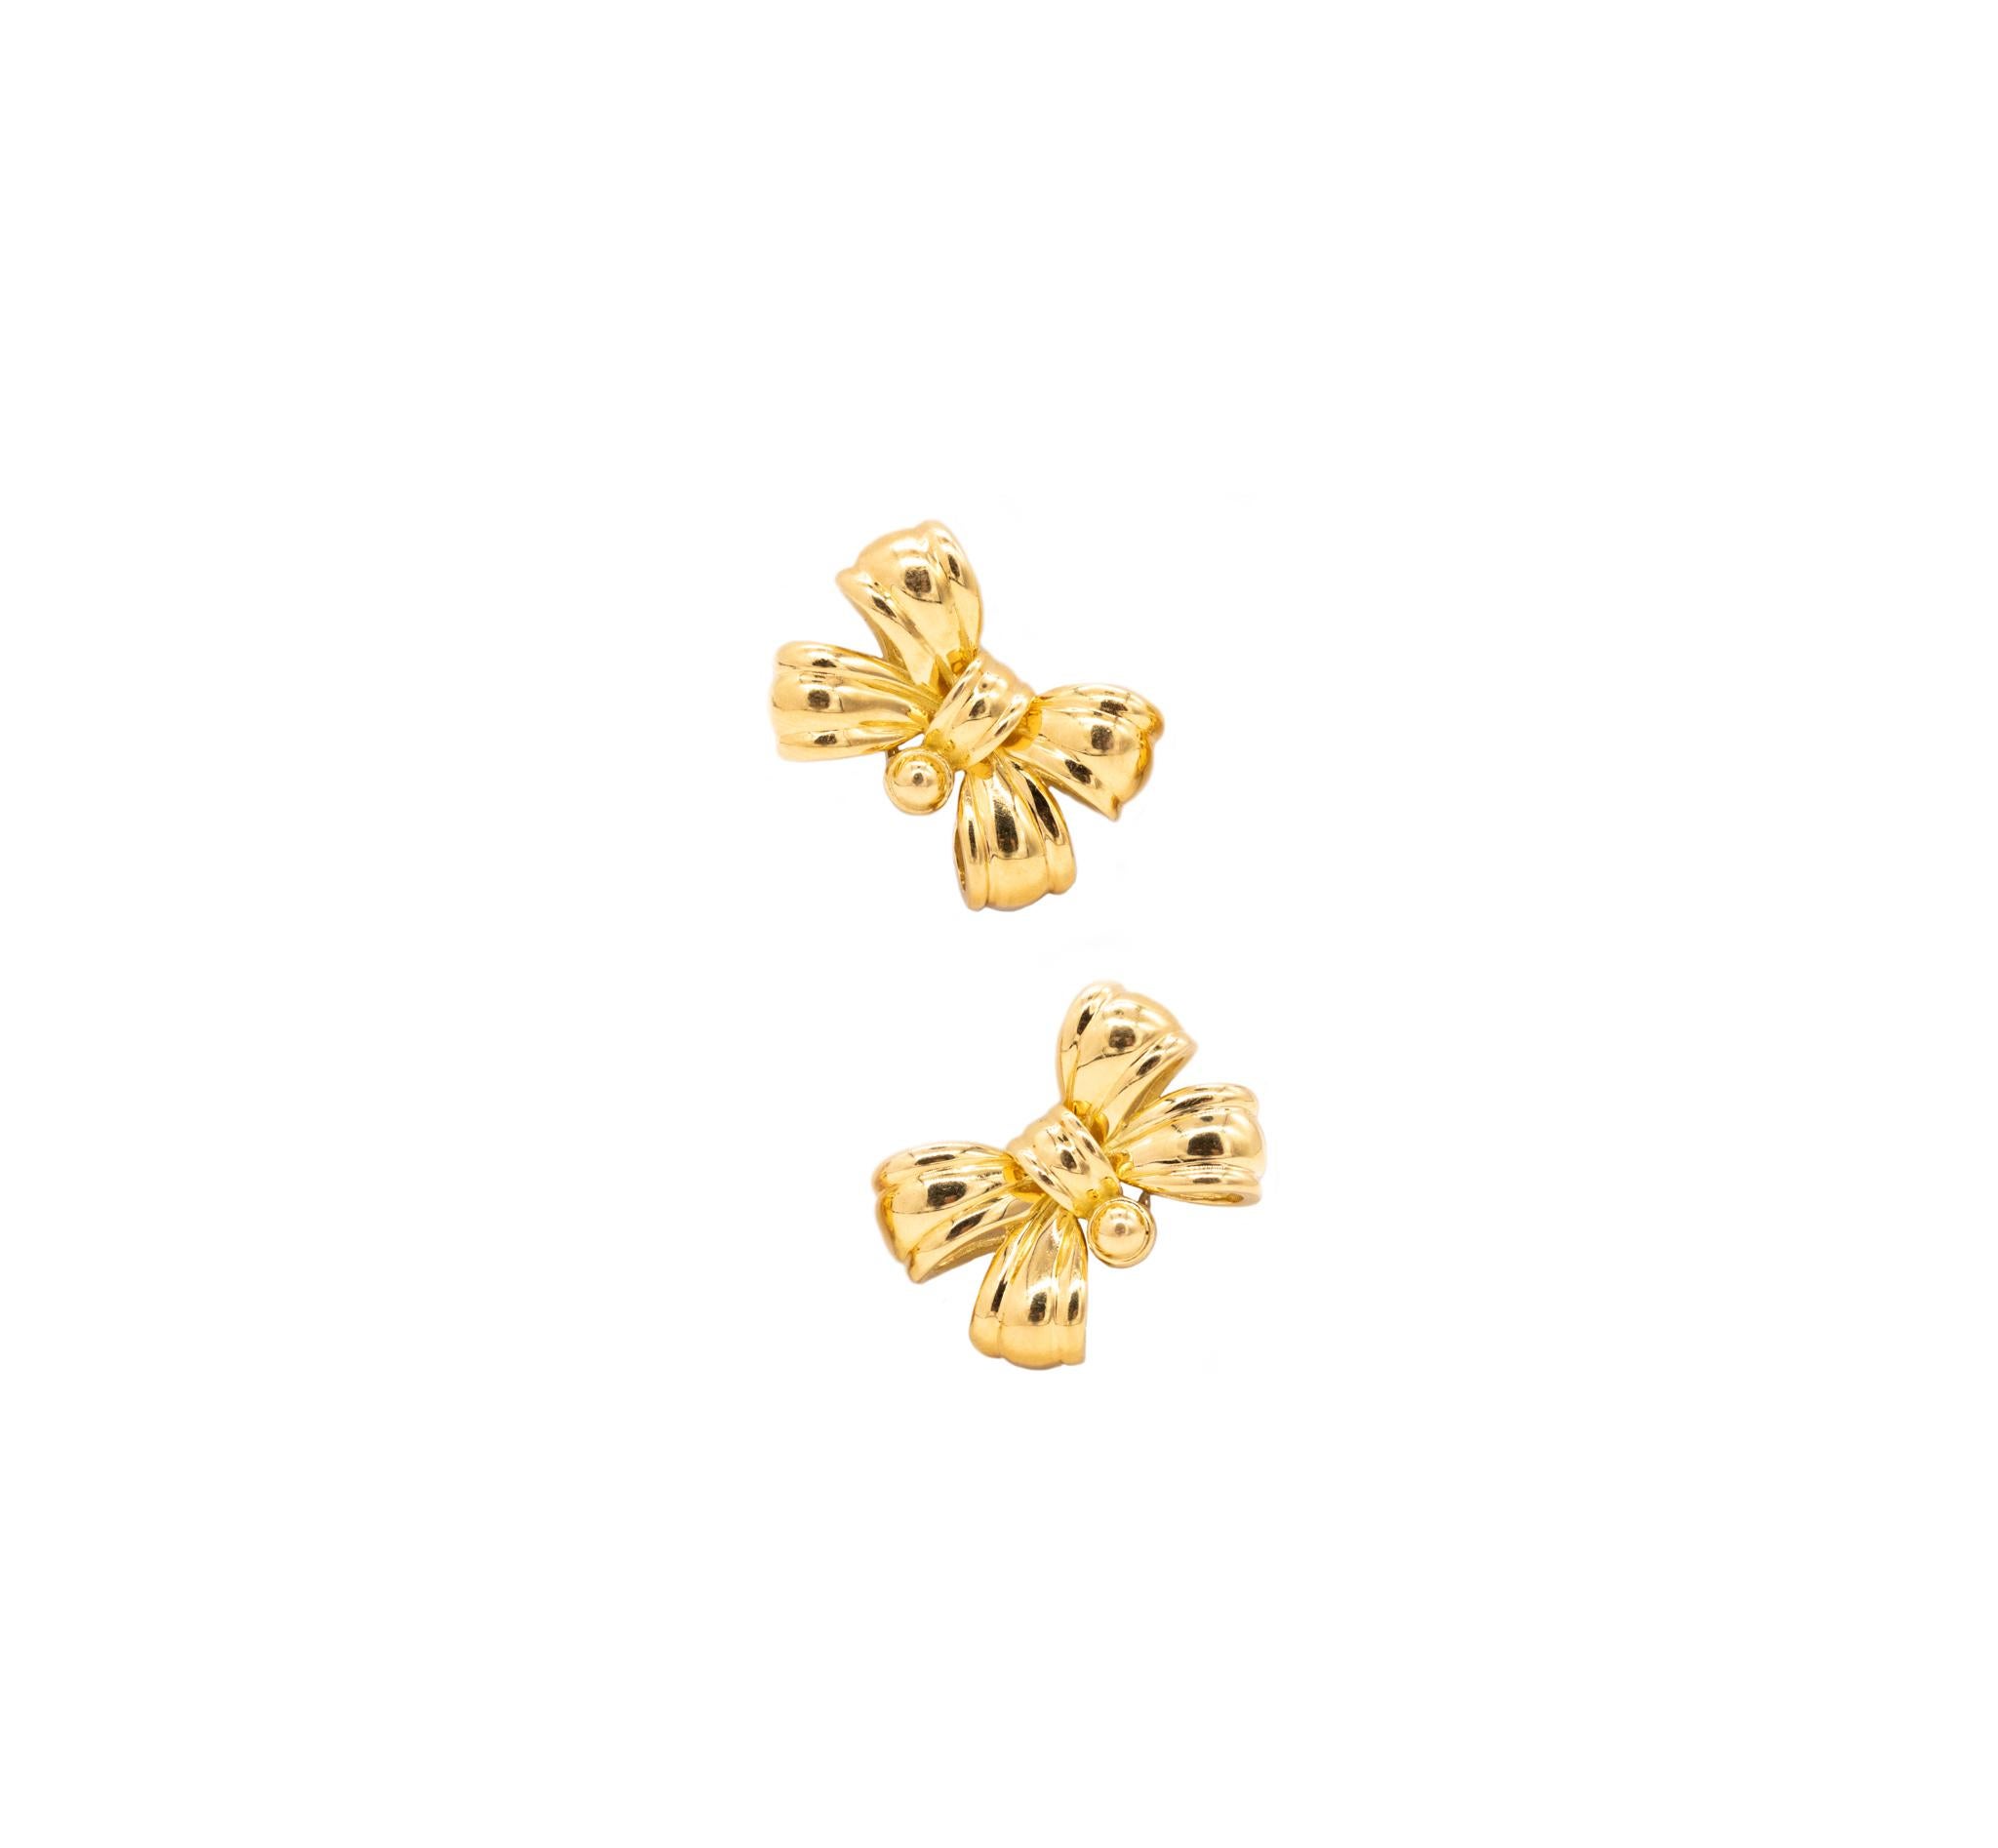 Nice pair of French earrings designed by J.P. Bellin.

Very handsome and unusual pail made in Paris, France at the atelier of J.P. Bellin. They was crafted as a pair of elaborated bows in solid yellow gold of 18 karats, with high polished finish.